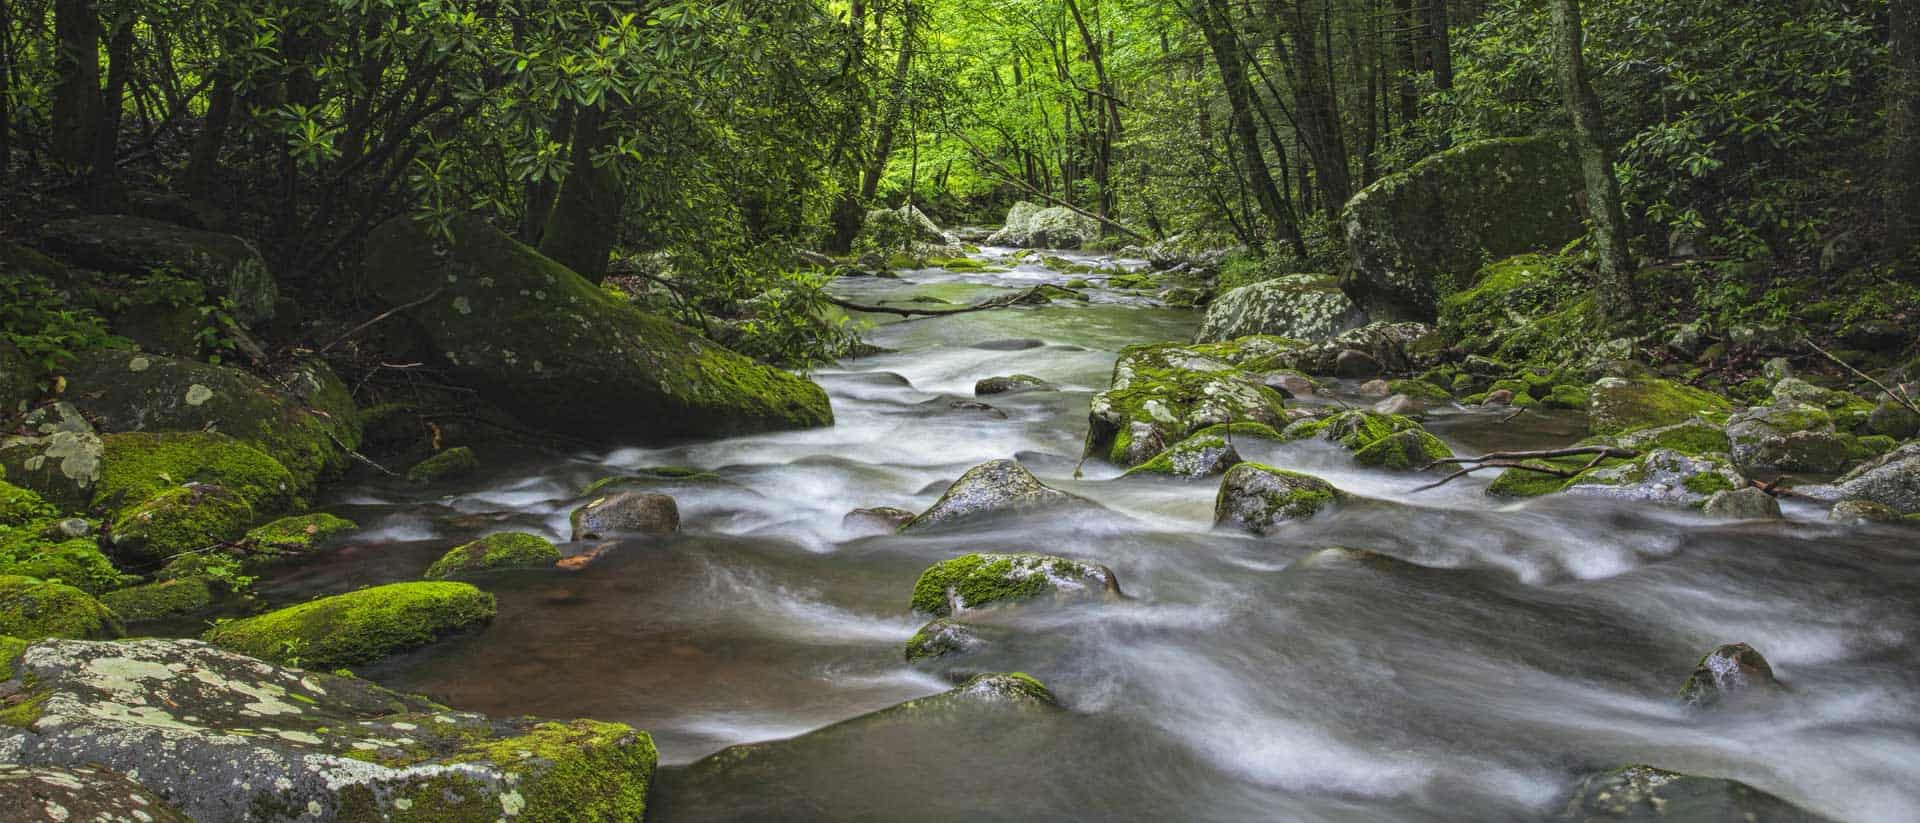 Stream in the Smoky Mountains national park